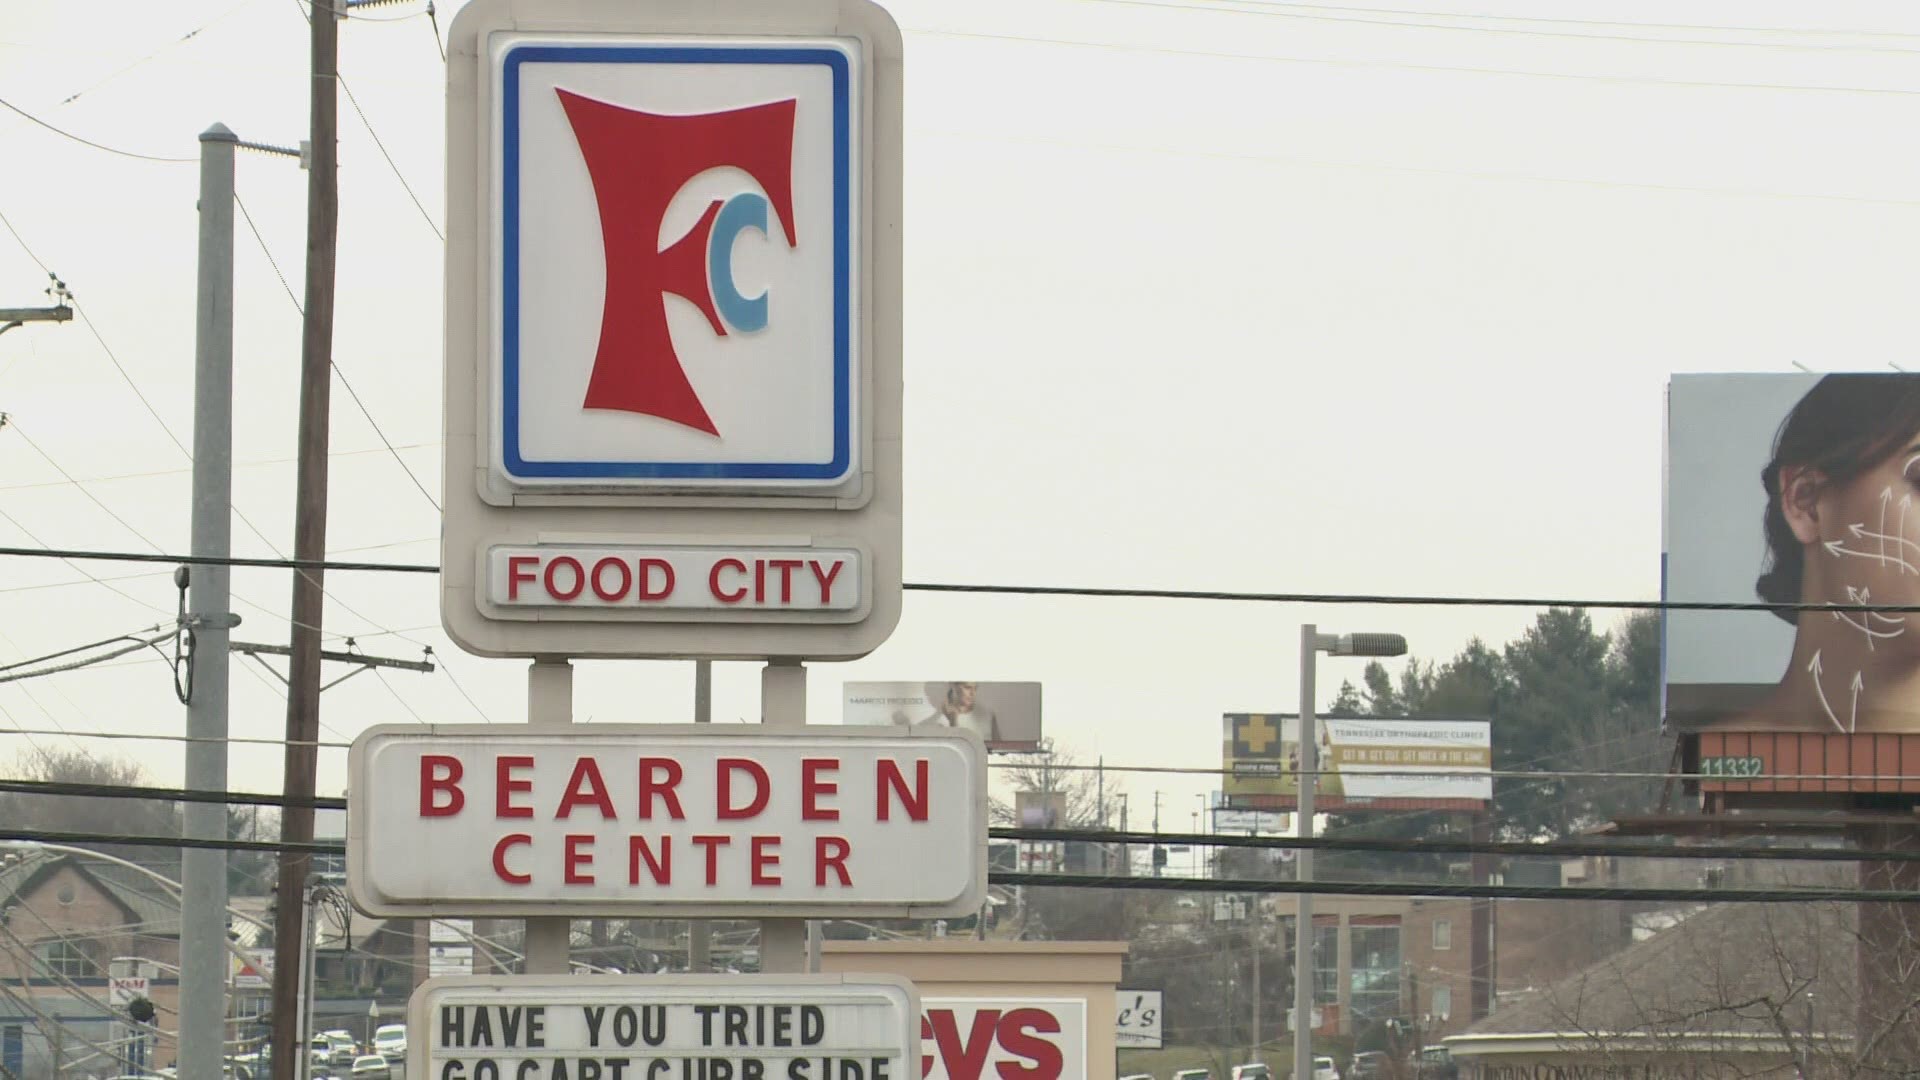 Tennessee officials said that the Food City store in Bearden sold enough oxycodone for every man, woman and child in Knoxville.